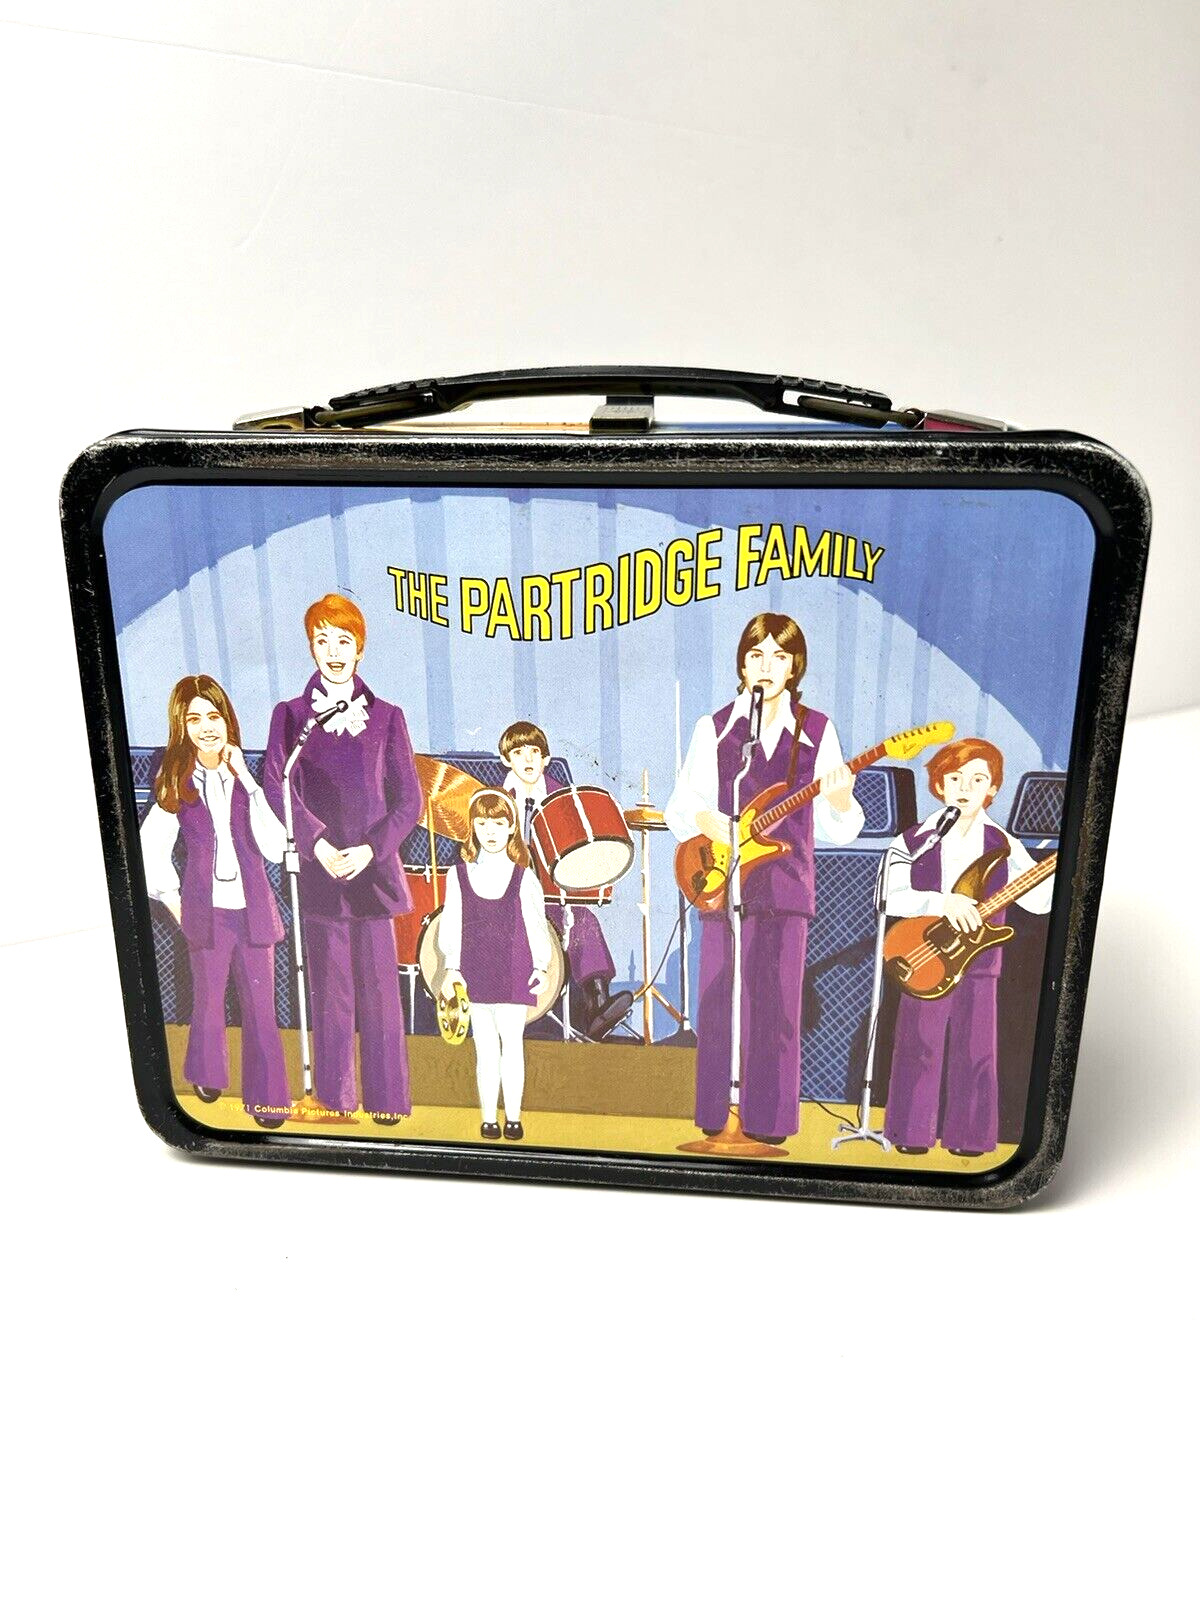 The Partridge Family  1973 Vintage Metal Lunchbox by King-Seeley - No Thermos